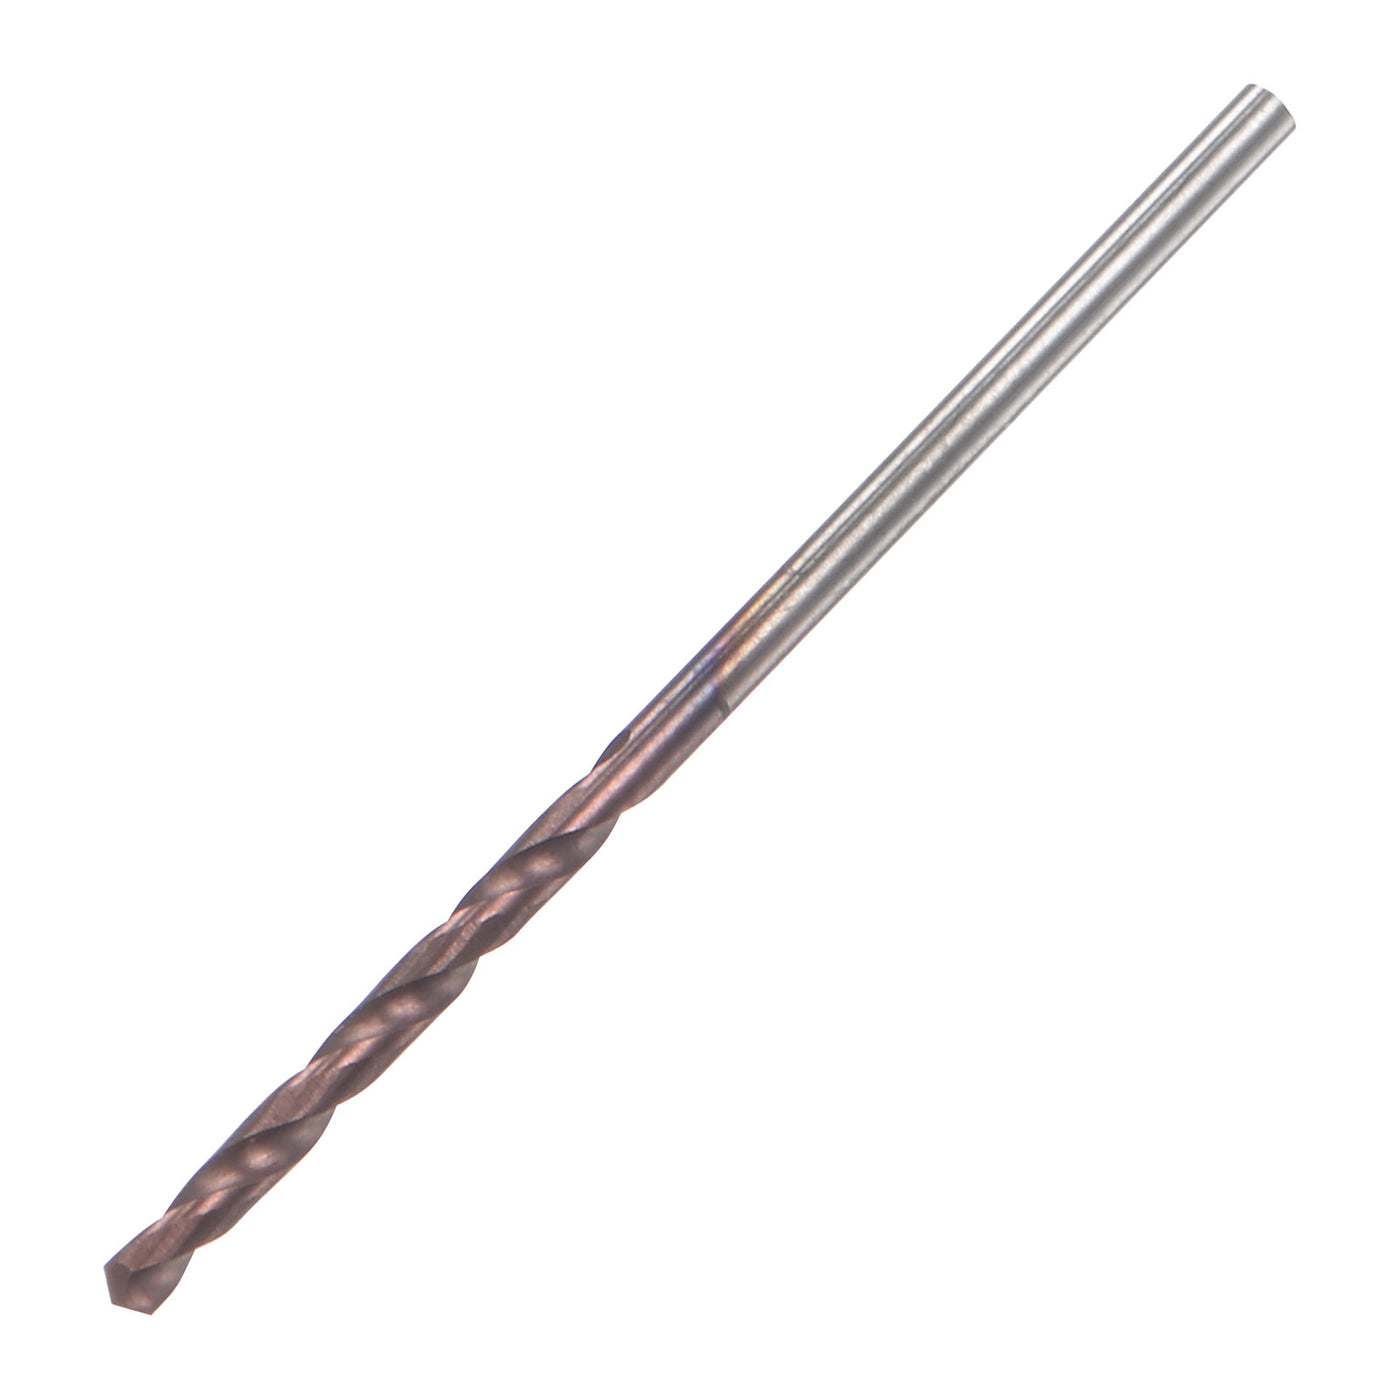 uxcell Uxcell 1.3mm DIN K45 Tungsten Carbide AlTiSin Coated Drill Bit for Stainless Steel